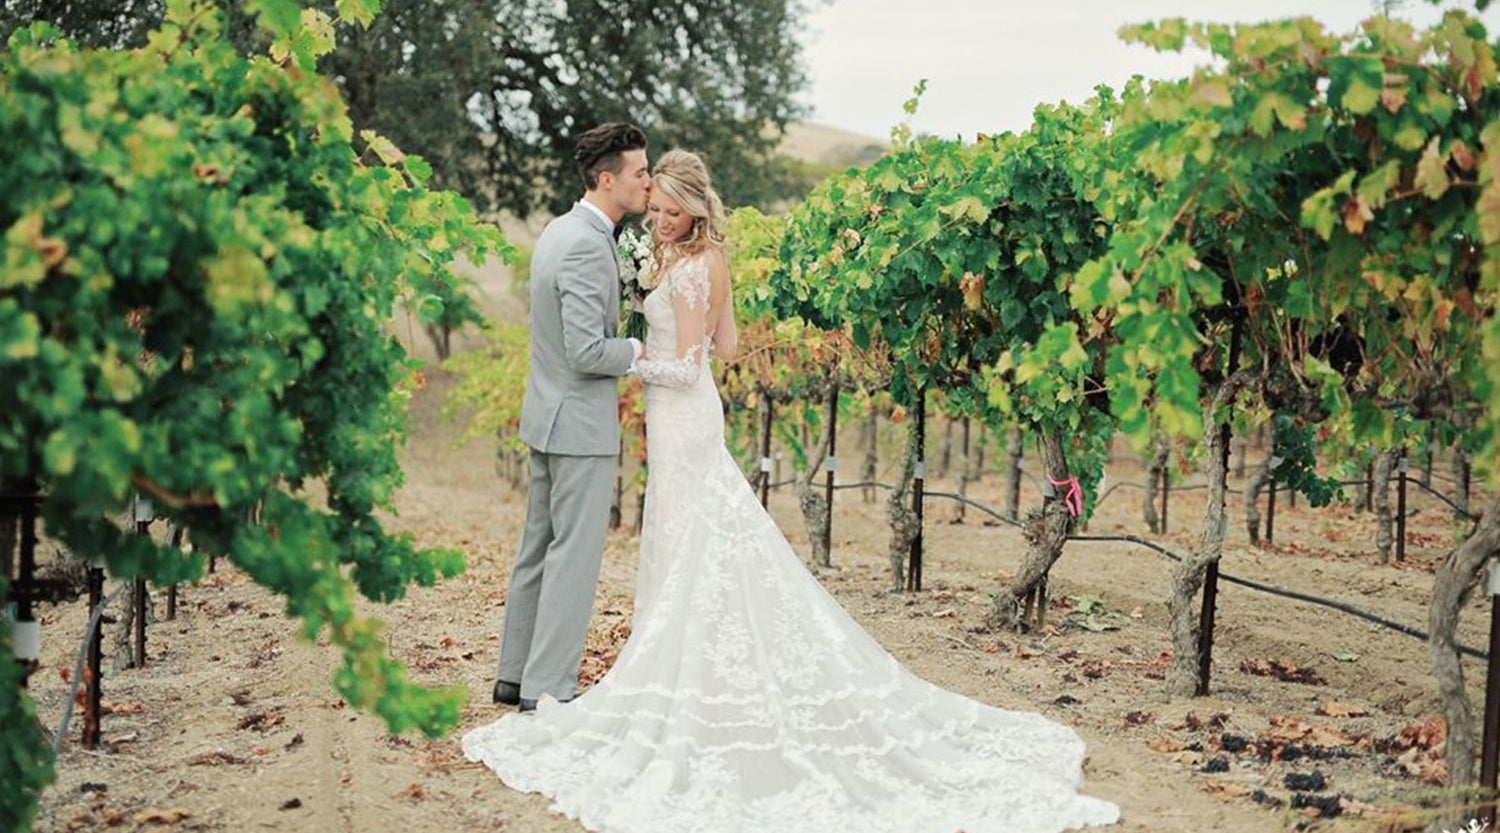 Weddings in Paso Robles and San Miguel wine country